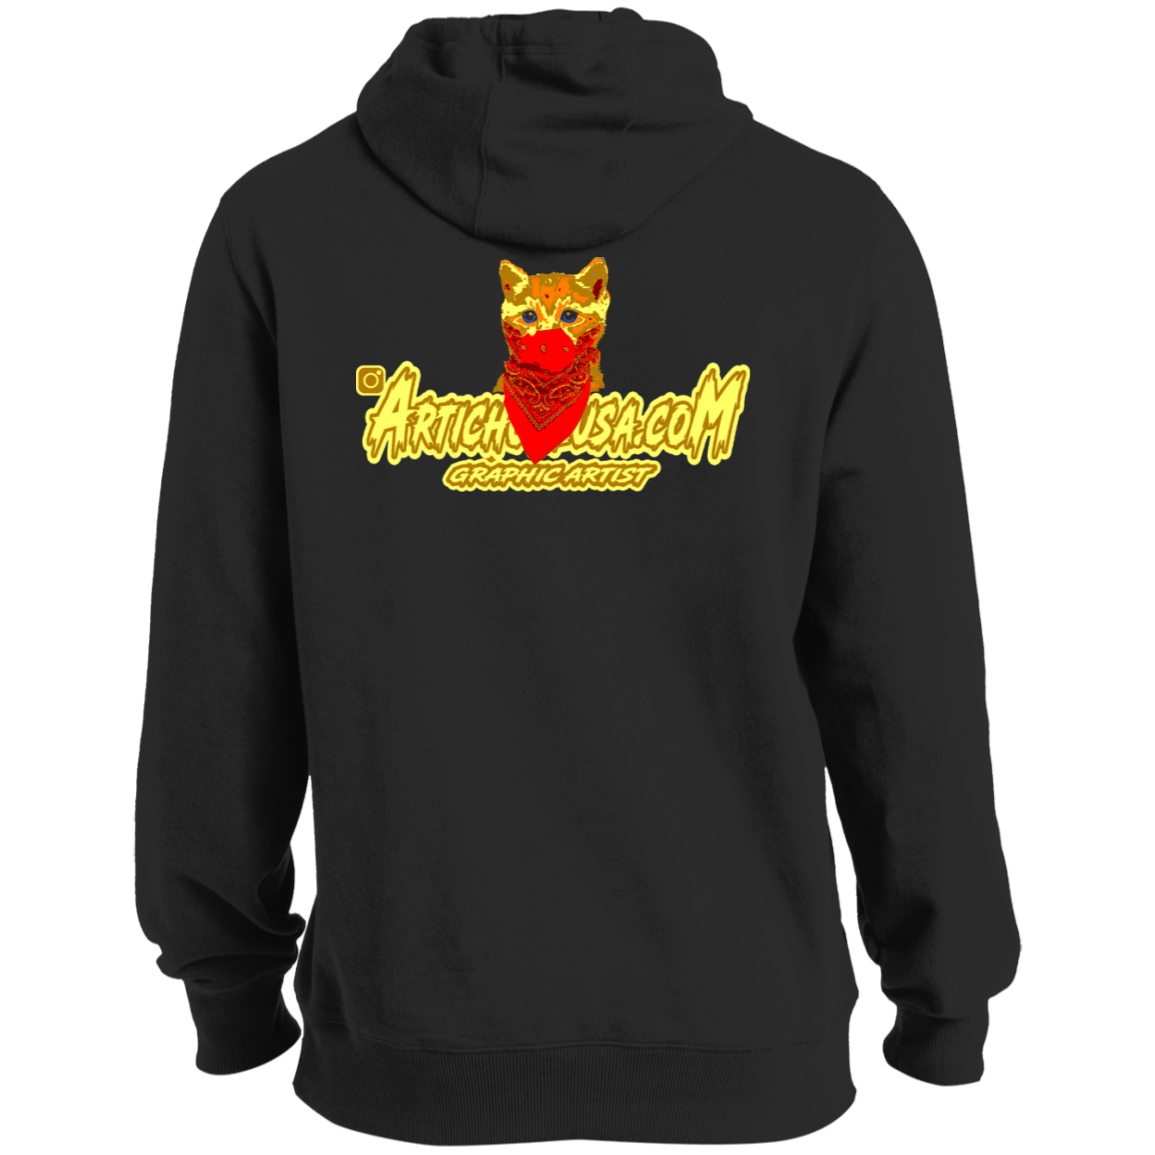 ArtichokeUSA Custom Design. You've Got To Be Kitten Me?! 2020, Not What We Expected. Ultra Soft Pullover Hoodie